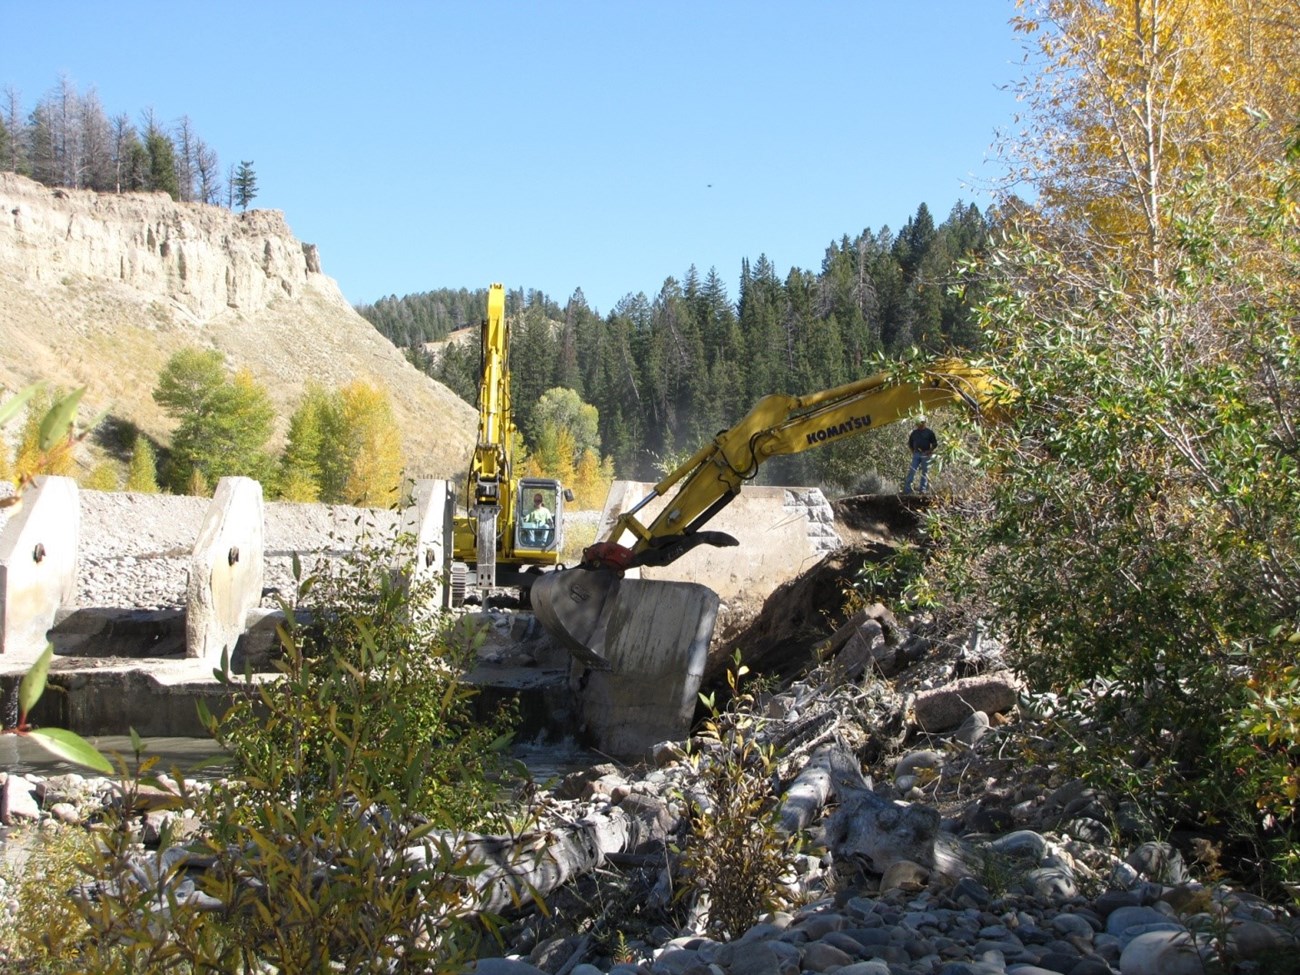 The concrete dam that was removed in 2010 through a partnership effort used to completely block native fish passage to the upper reaches of Spread Creek.